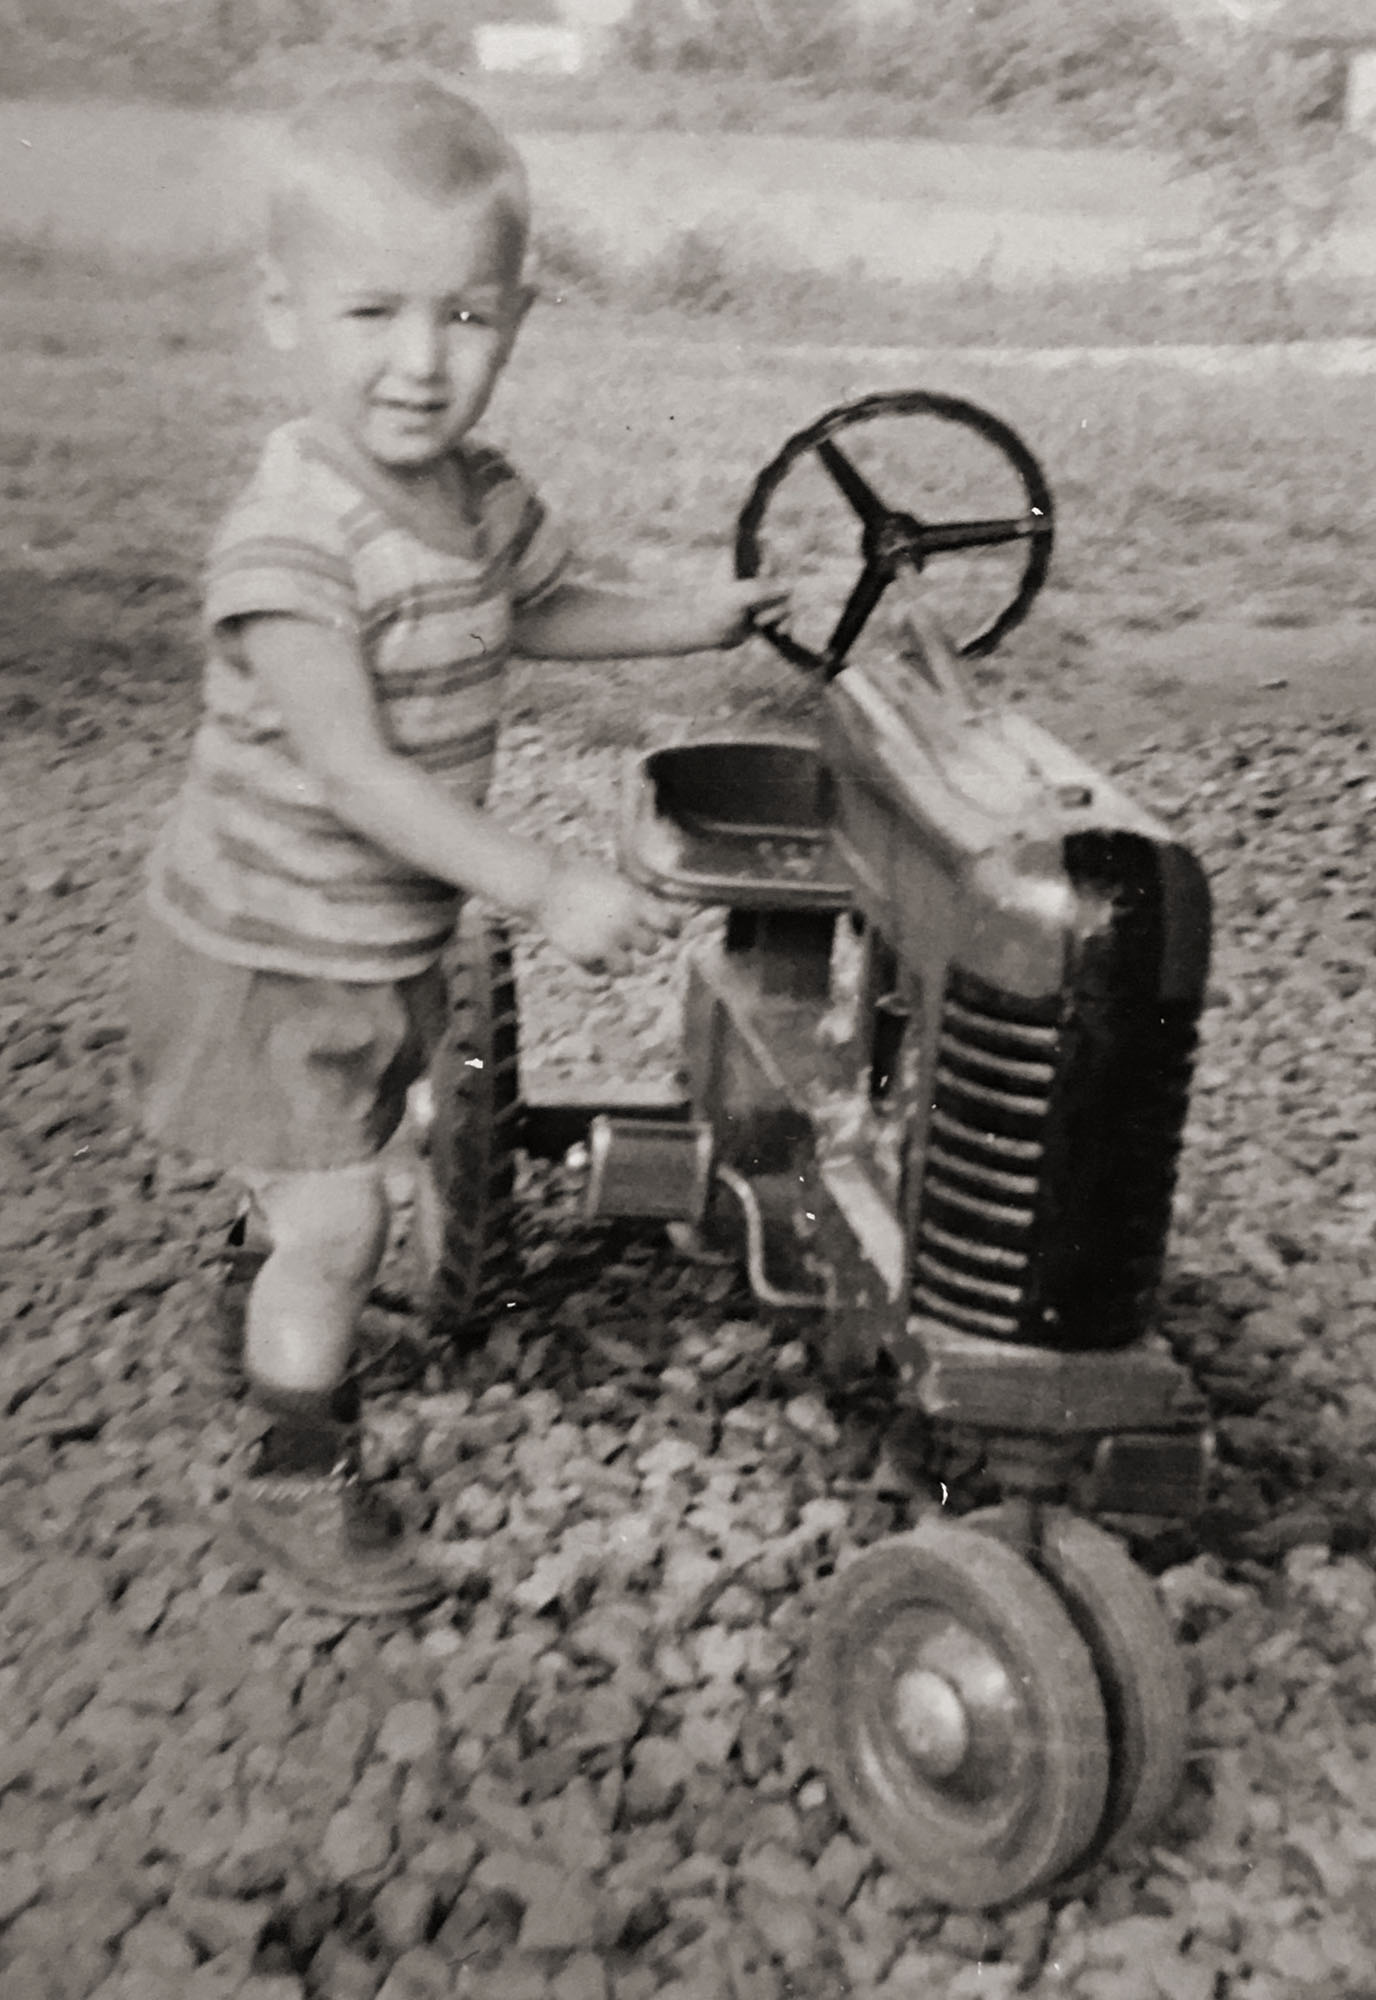 Picture taken June, 1957 in Maryville TN. Picture of me, Robbie Roberson. I was about 3 years old. 